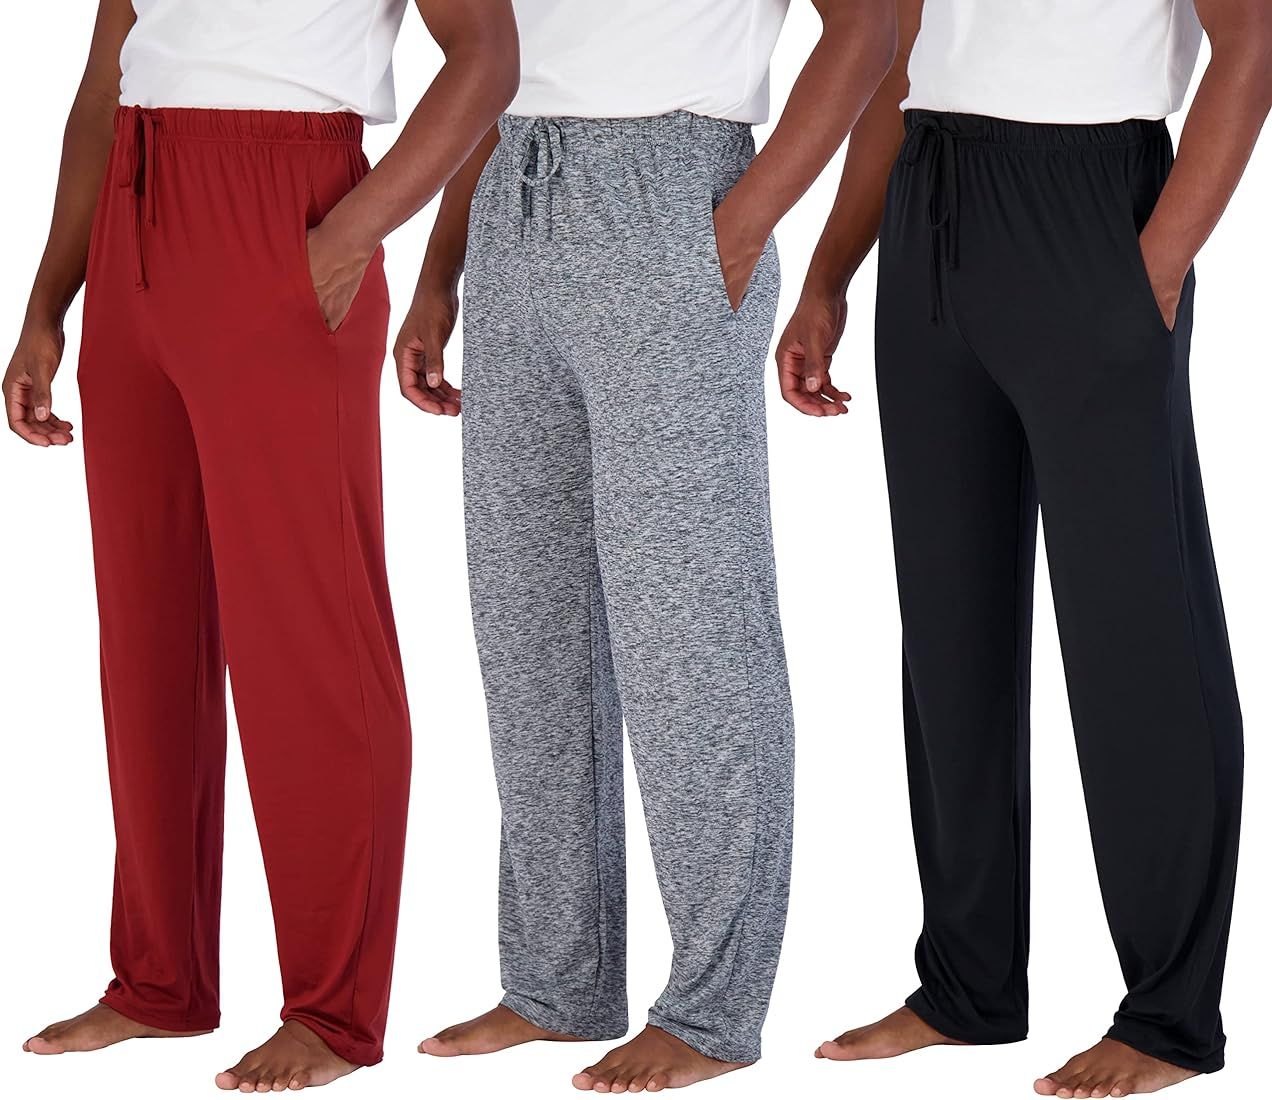 Real Essentials 3 Pack: Men's Soft Pajama Lounge Pants with Drawstring & Pockets - 4-Way Stretch & W | Amazon (US)